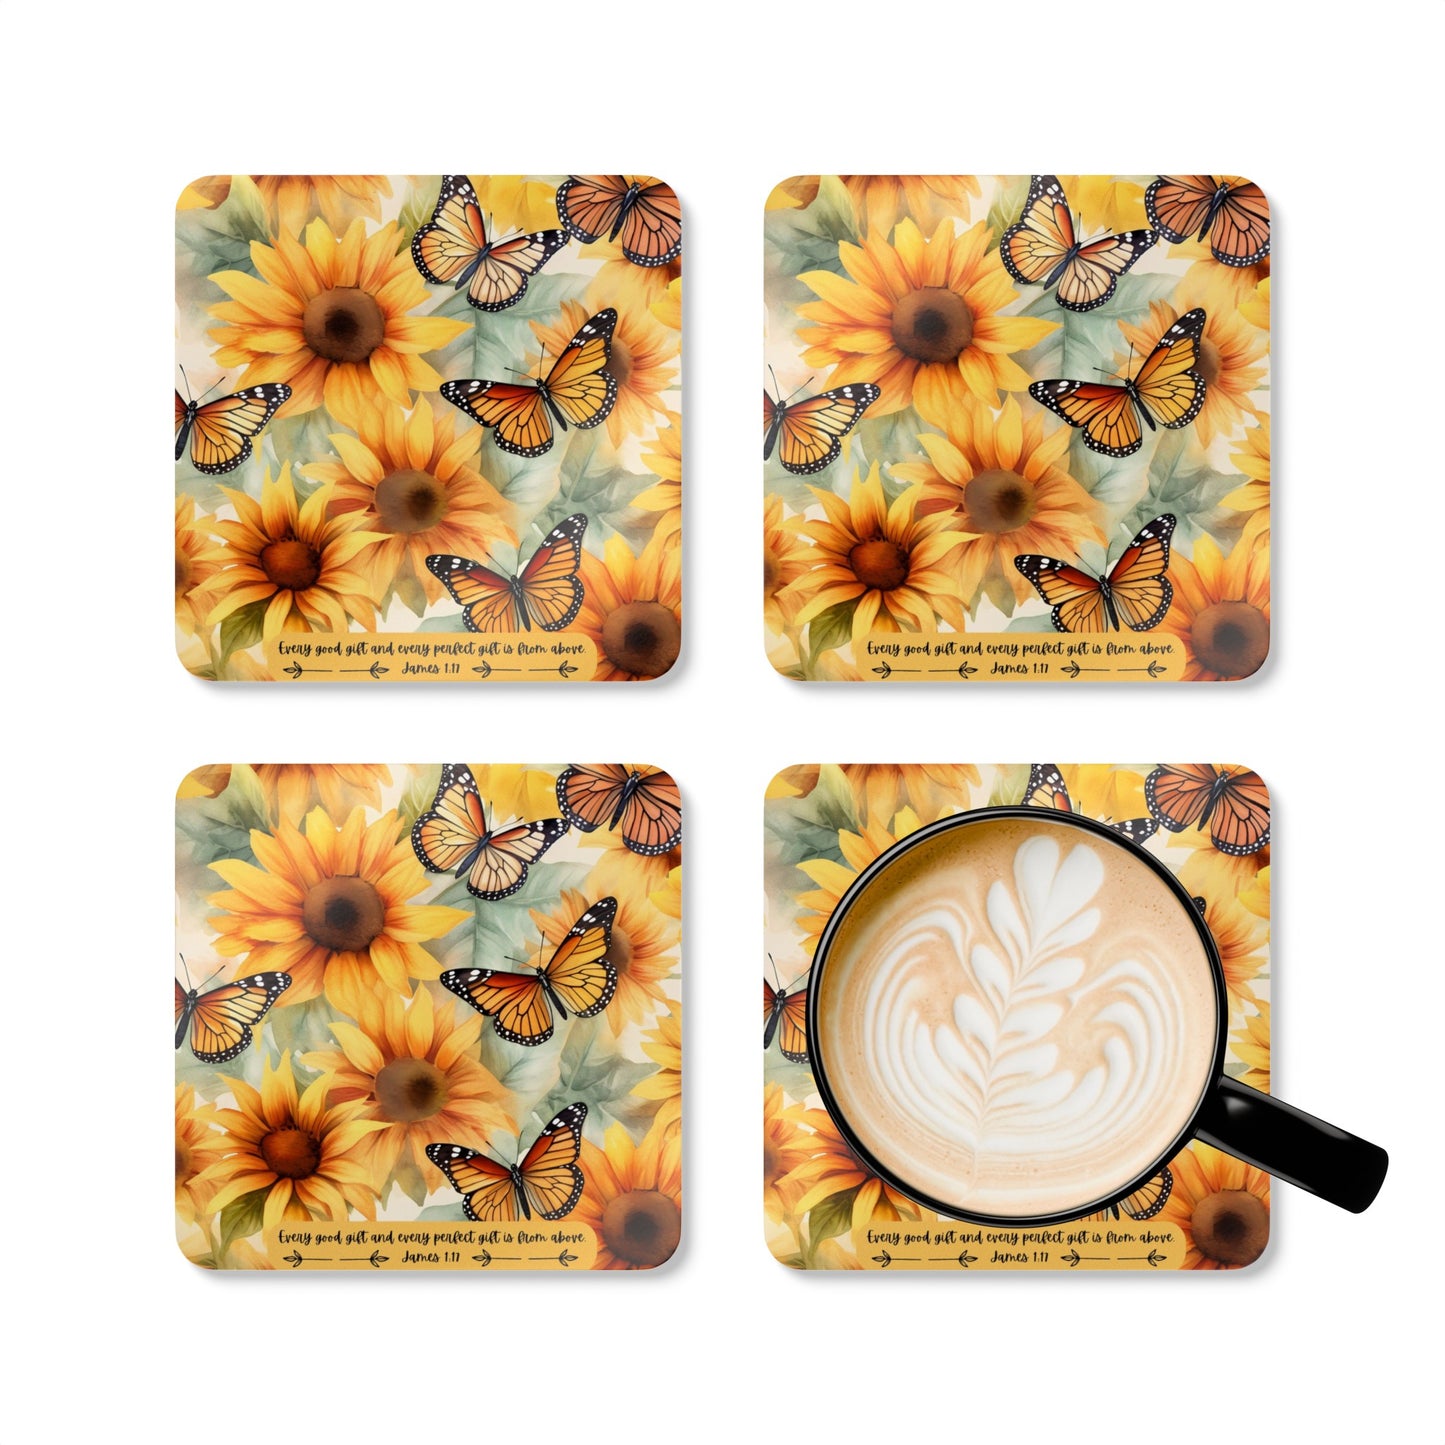 Sunflower and Butterfly Corkwood Coasters with Bible Verse - Set of 4